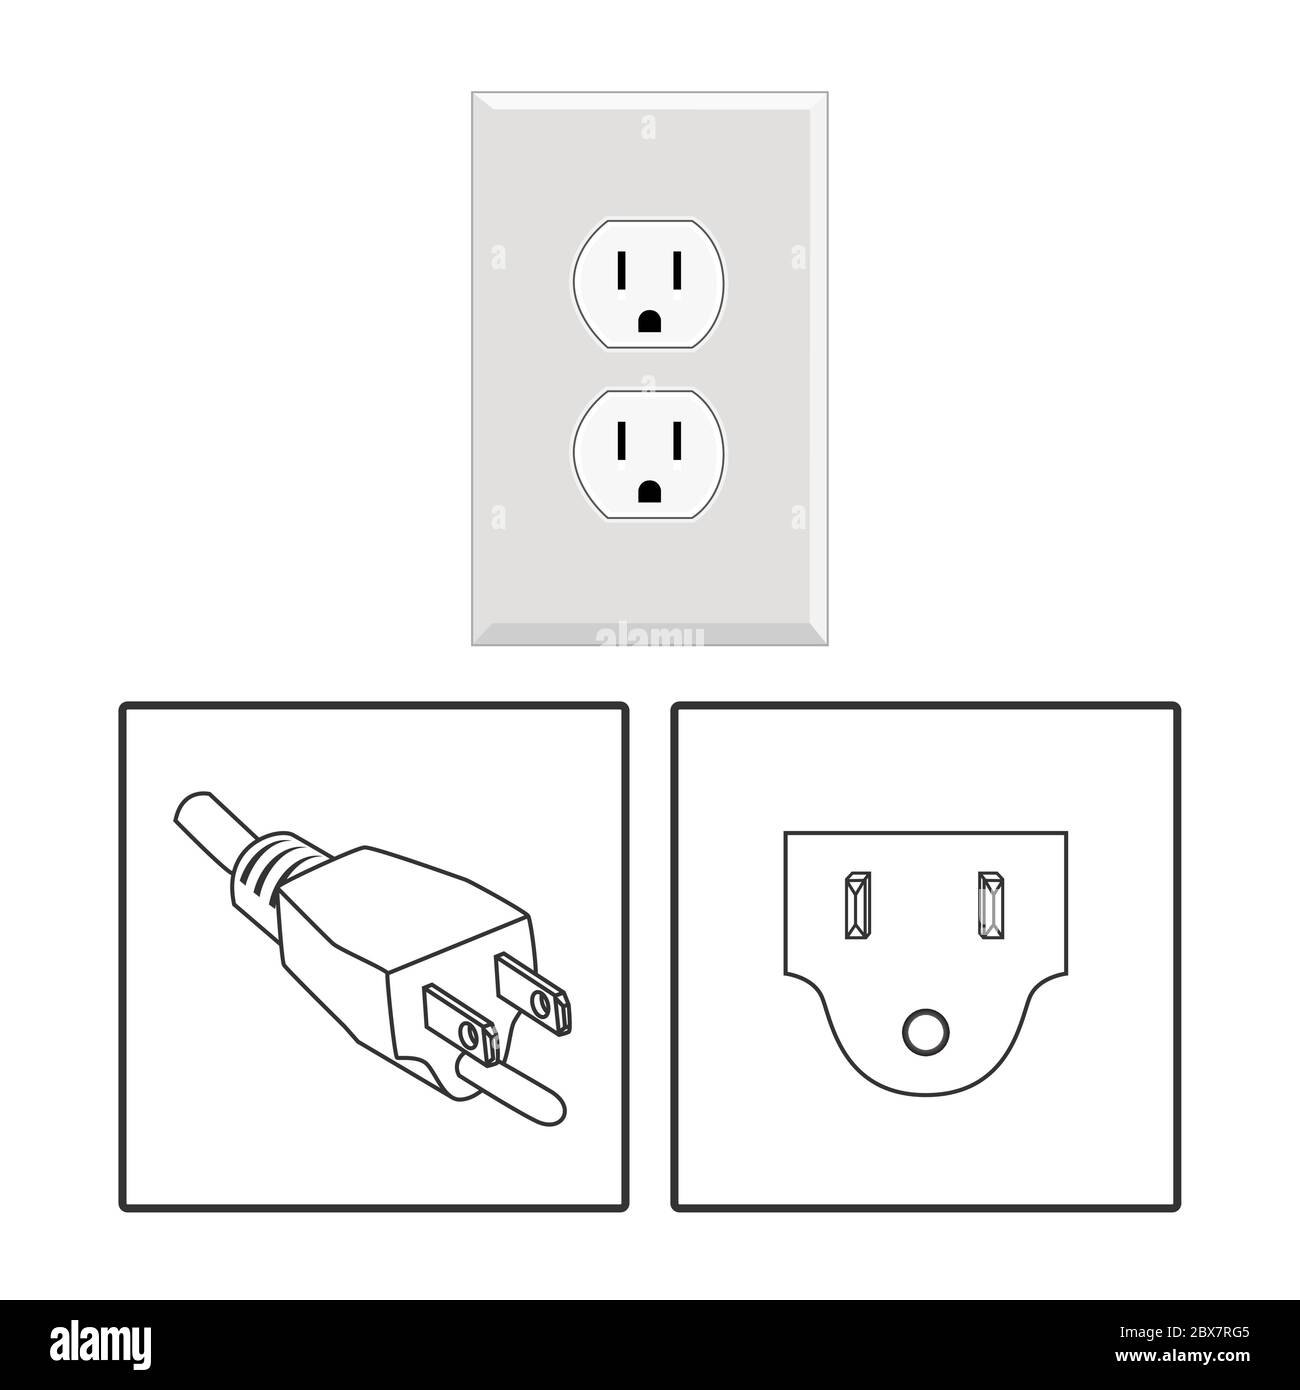 US socket and plug. Icon set. Three pin socket sheme isolated vector graphic illustration. simple diagram electrical appliance plug Stock Vector